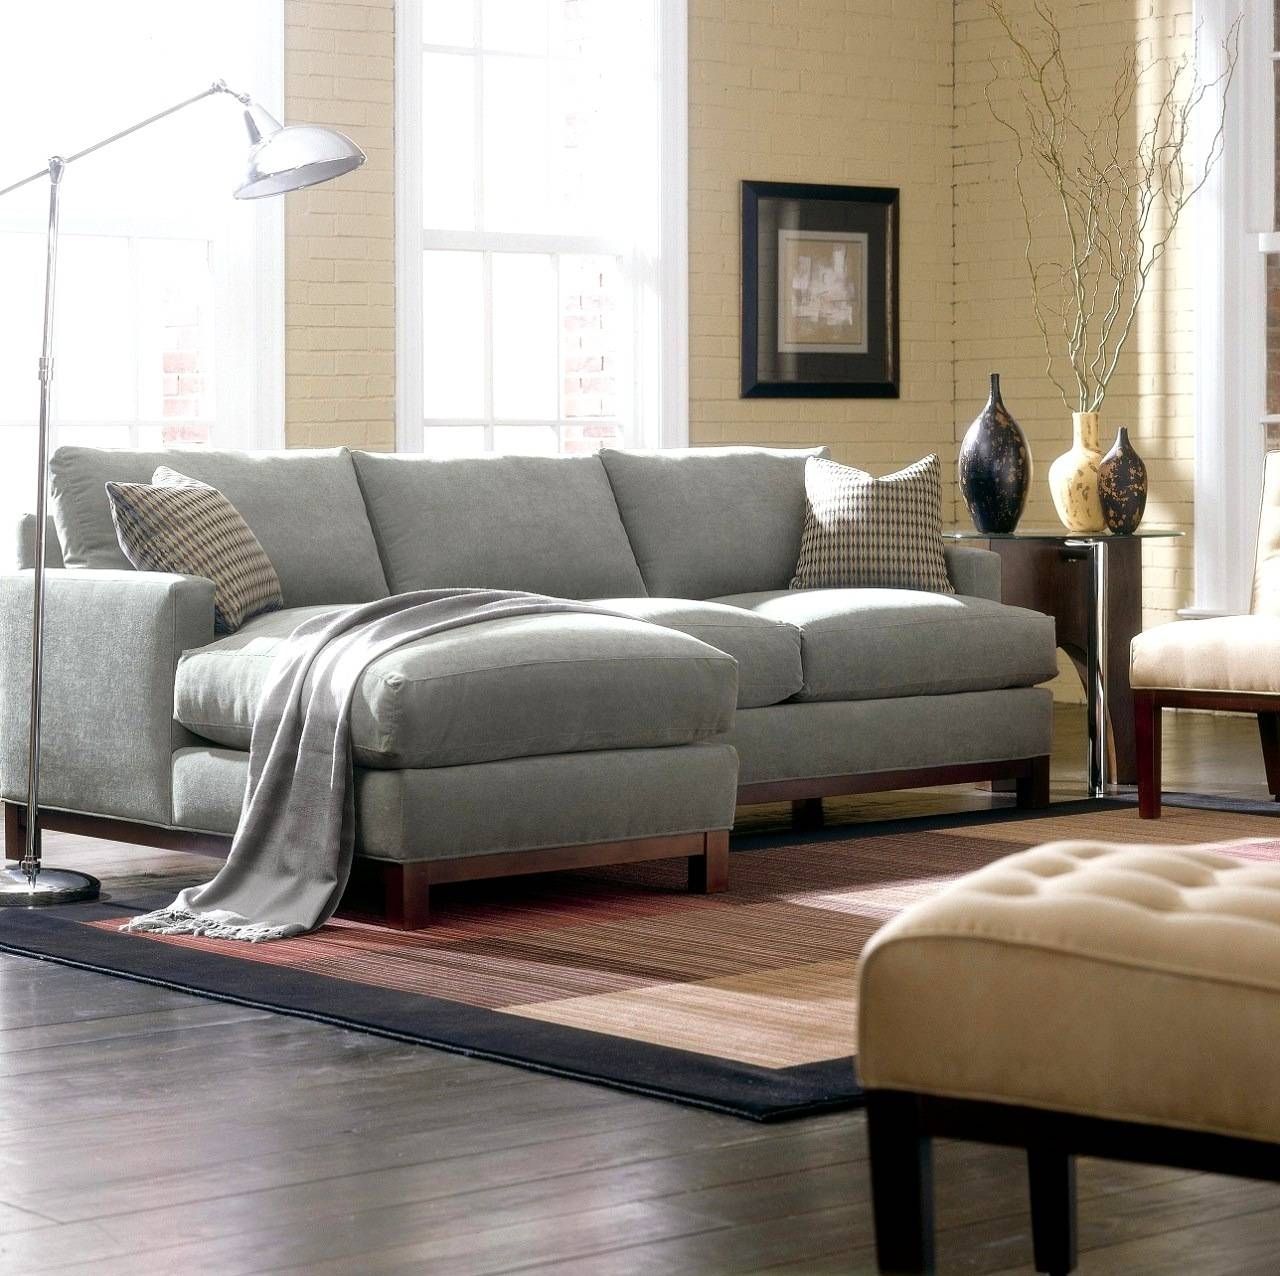 Room And Board Sectional Sofa – Cleanupflorida Regarding Room And Board Sectional Sofa (Photo 9 of 25)